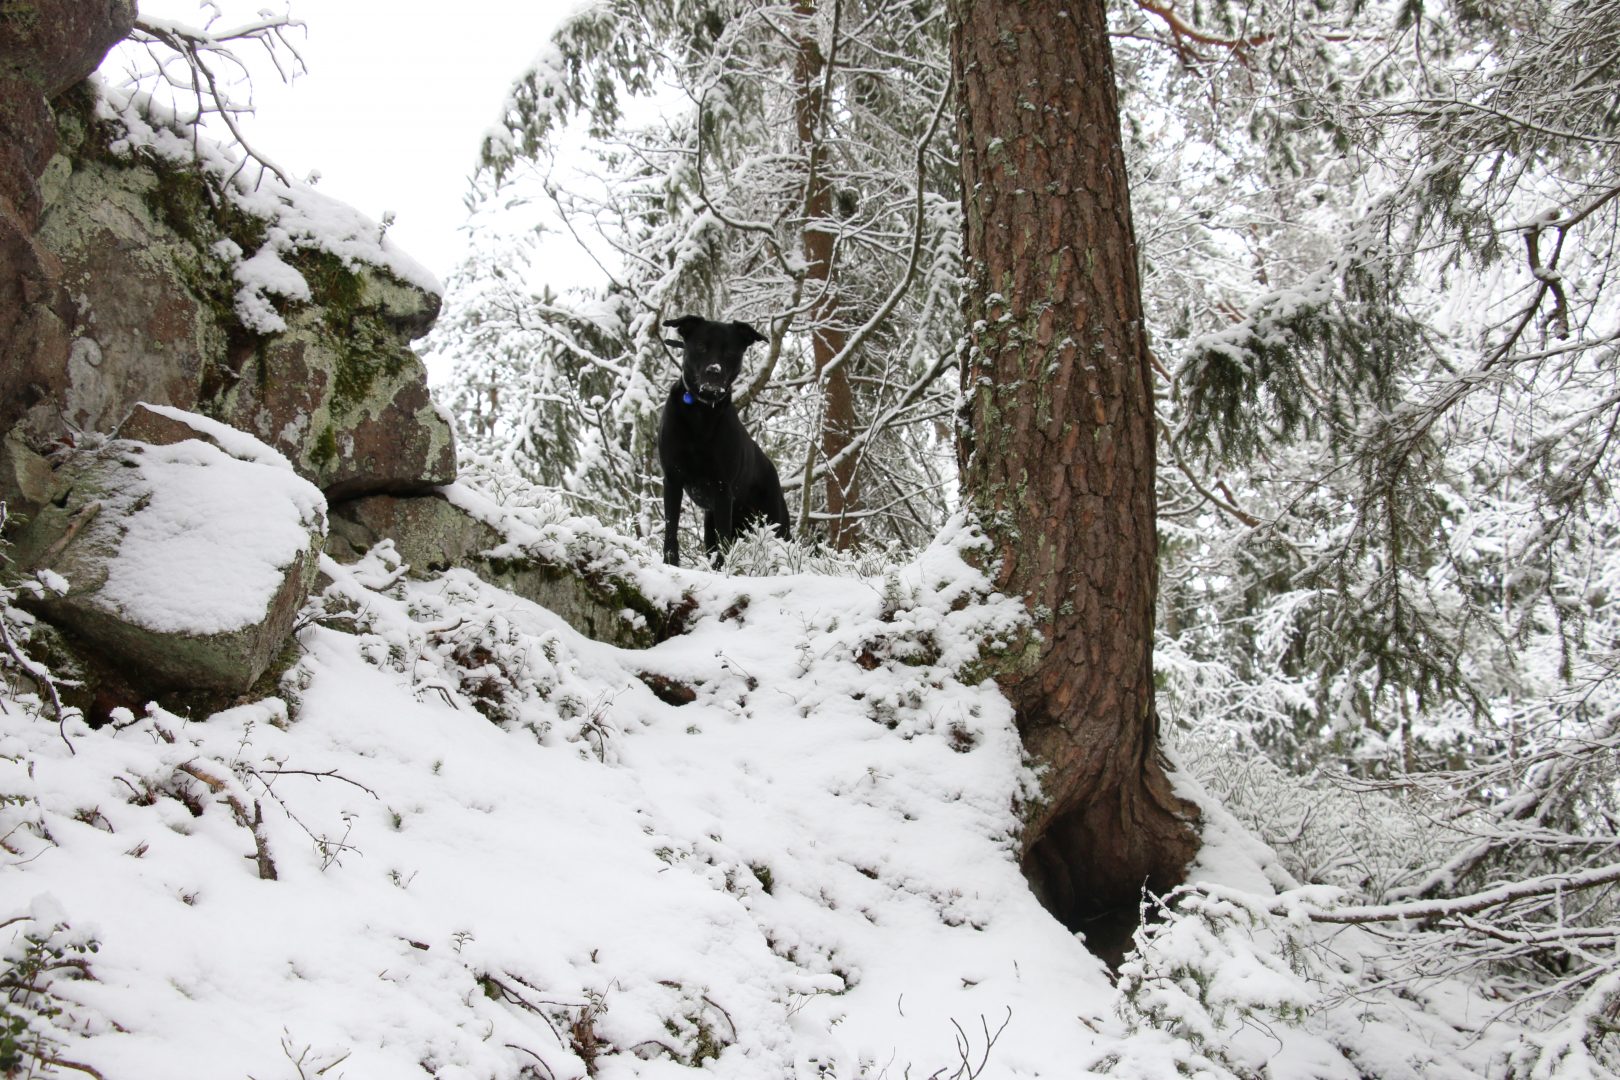 Tøsen is enjoying the forest to the utmost!